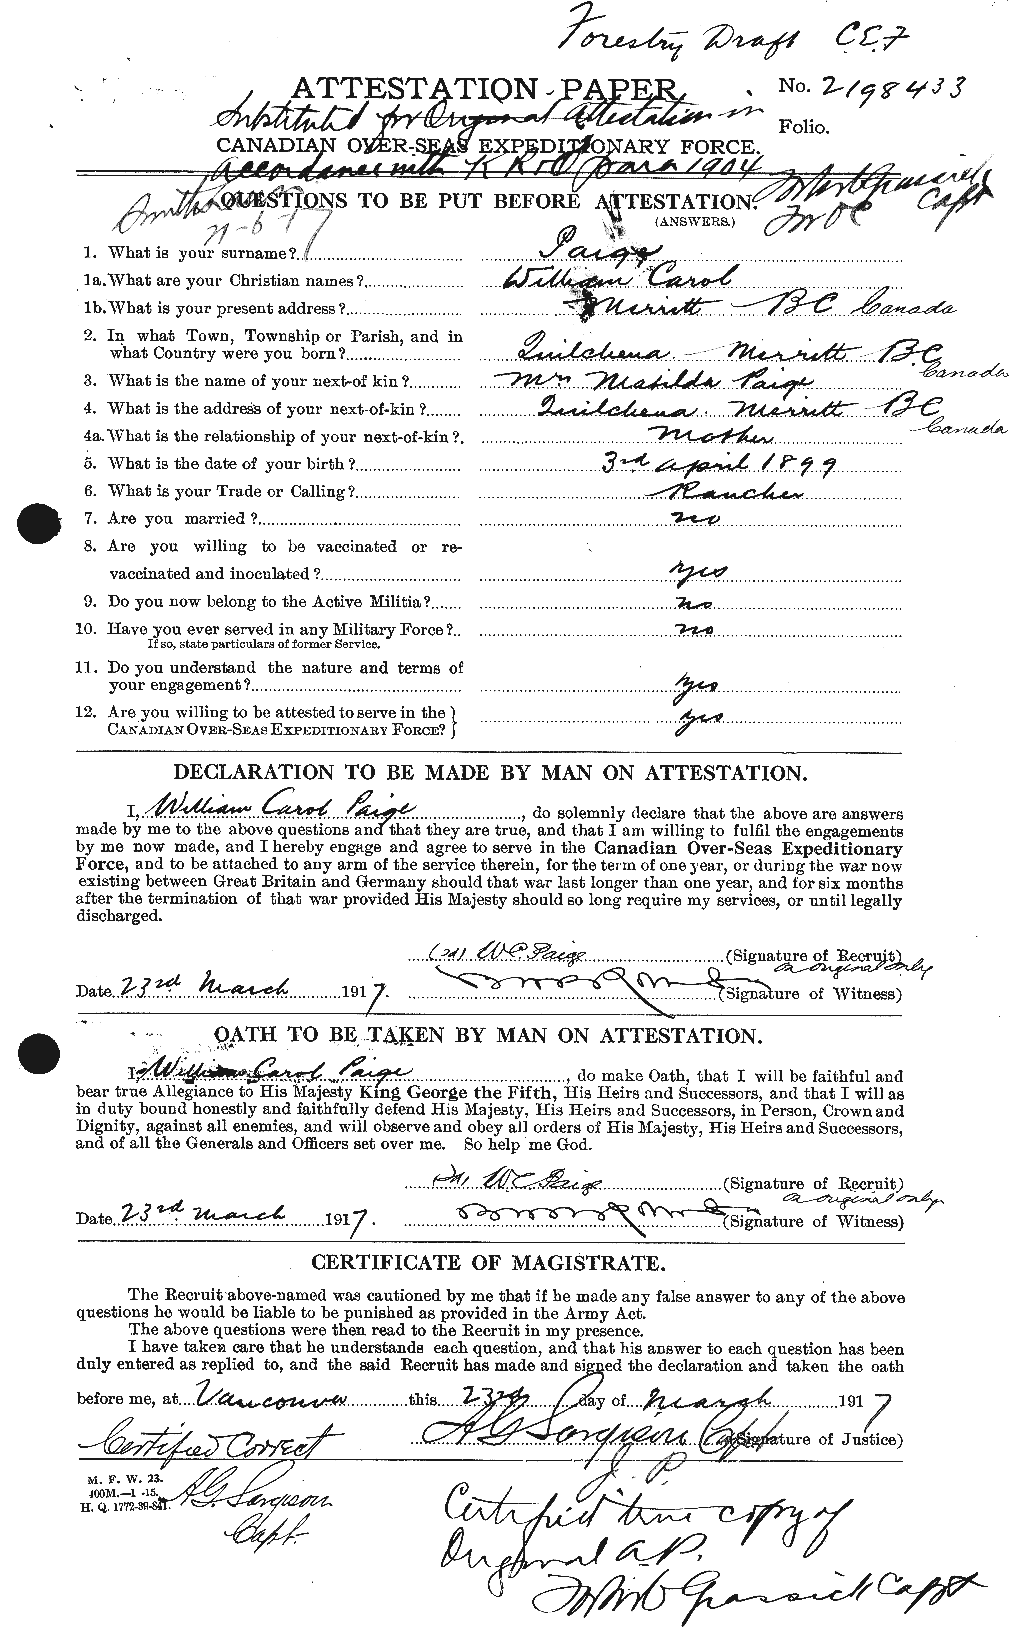 Personnel Records of the First World War - CEF 562436a